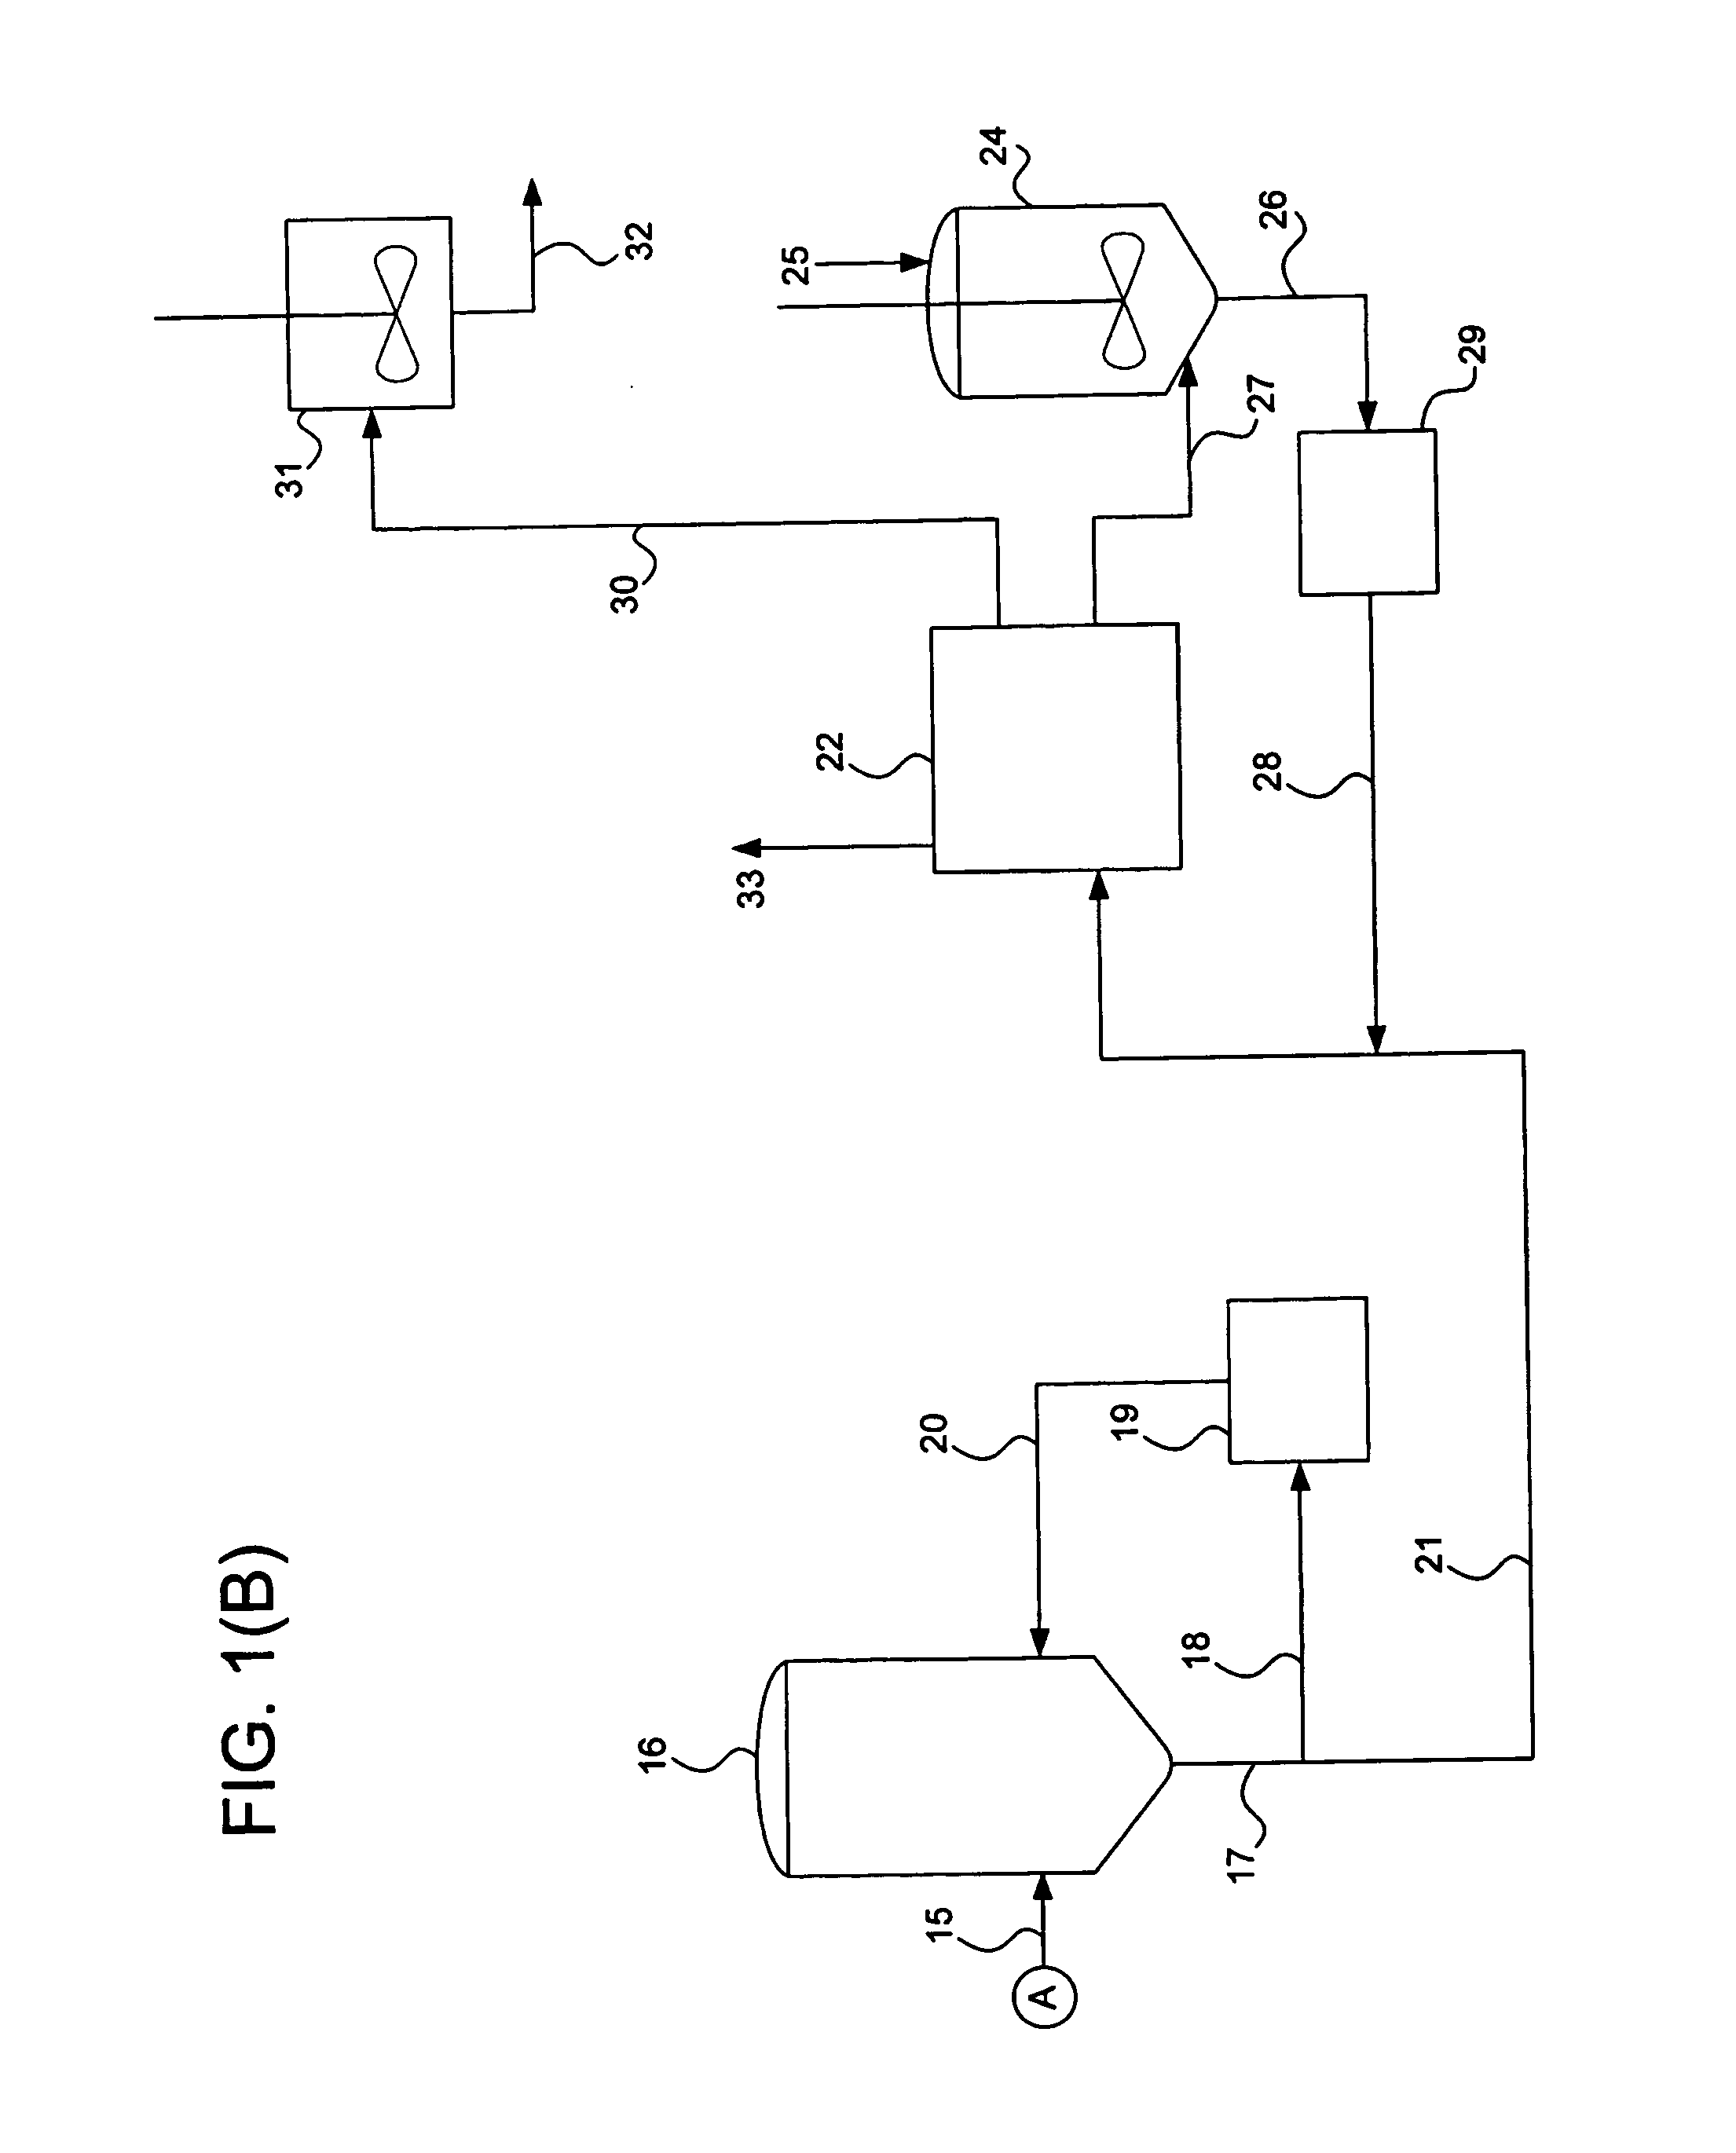 Method for extracting nylon from waste materials